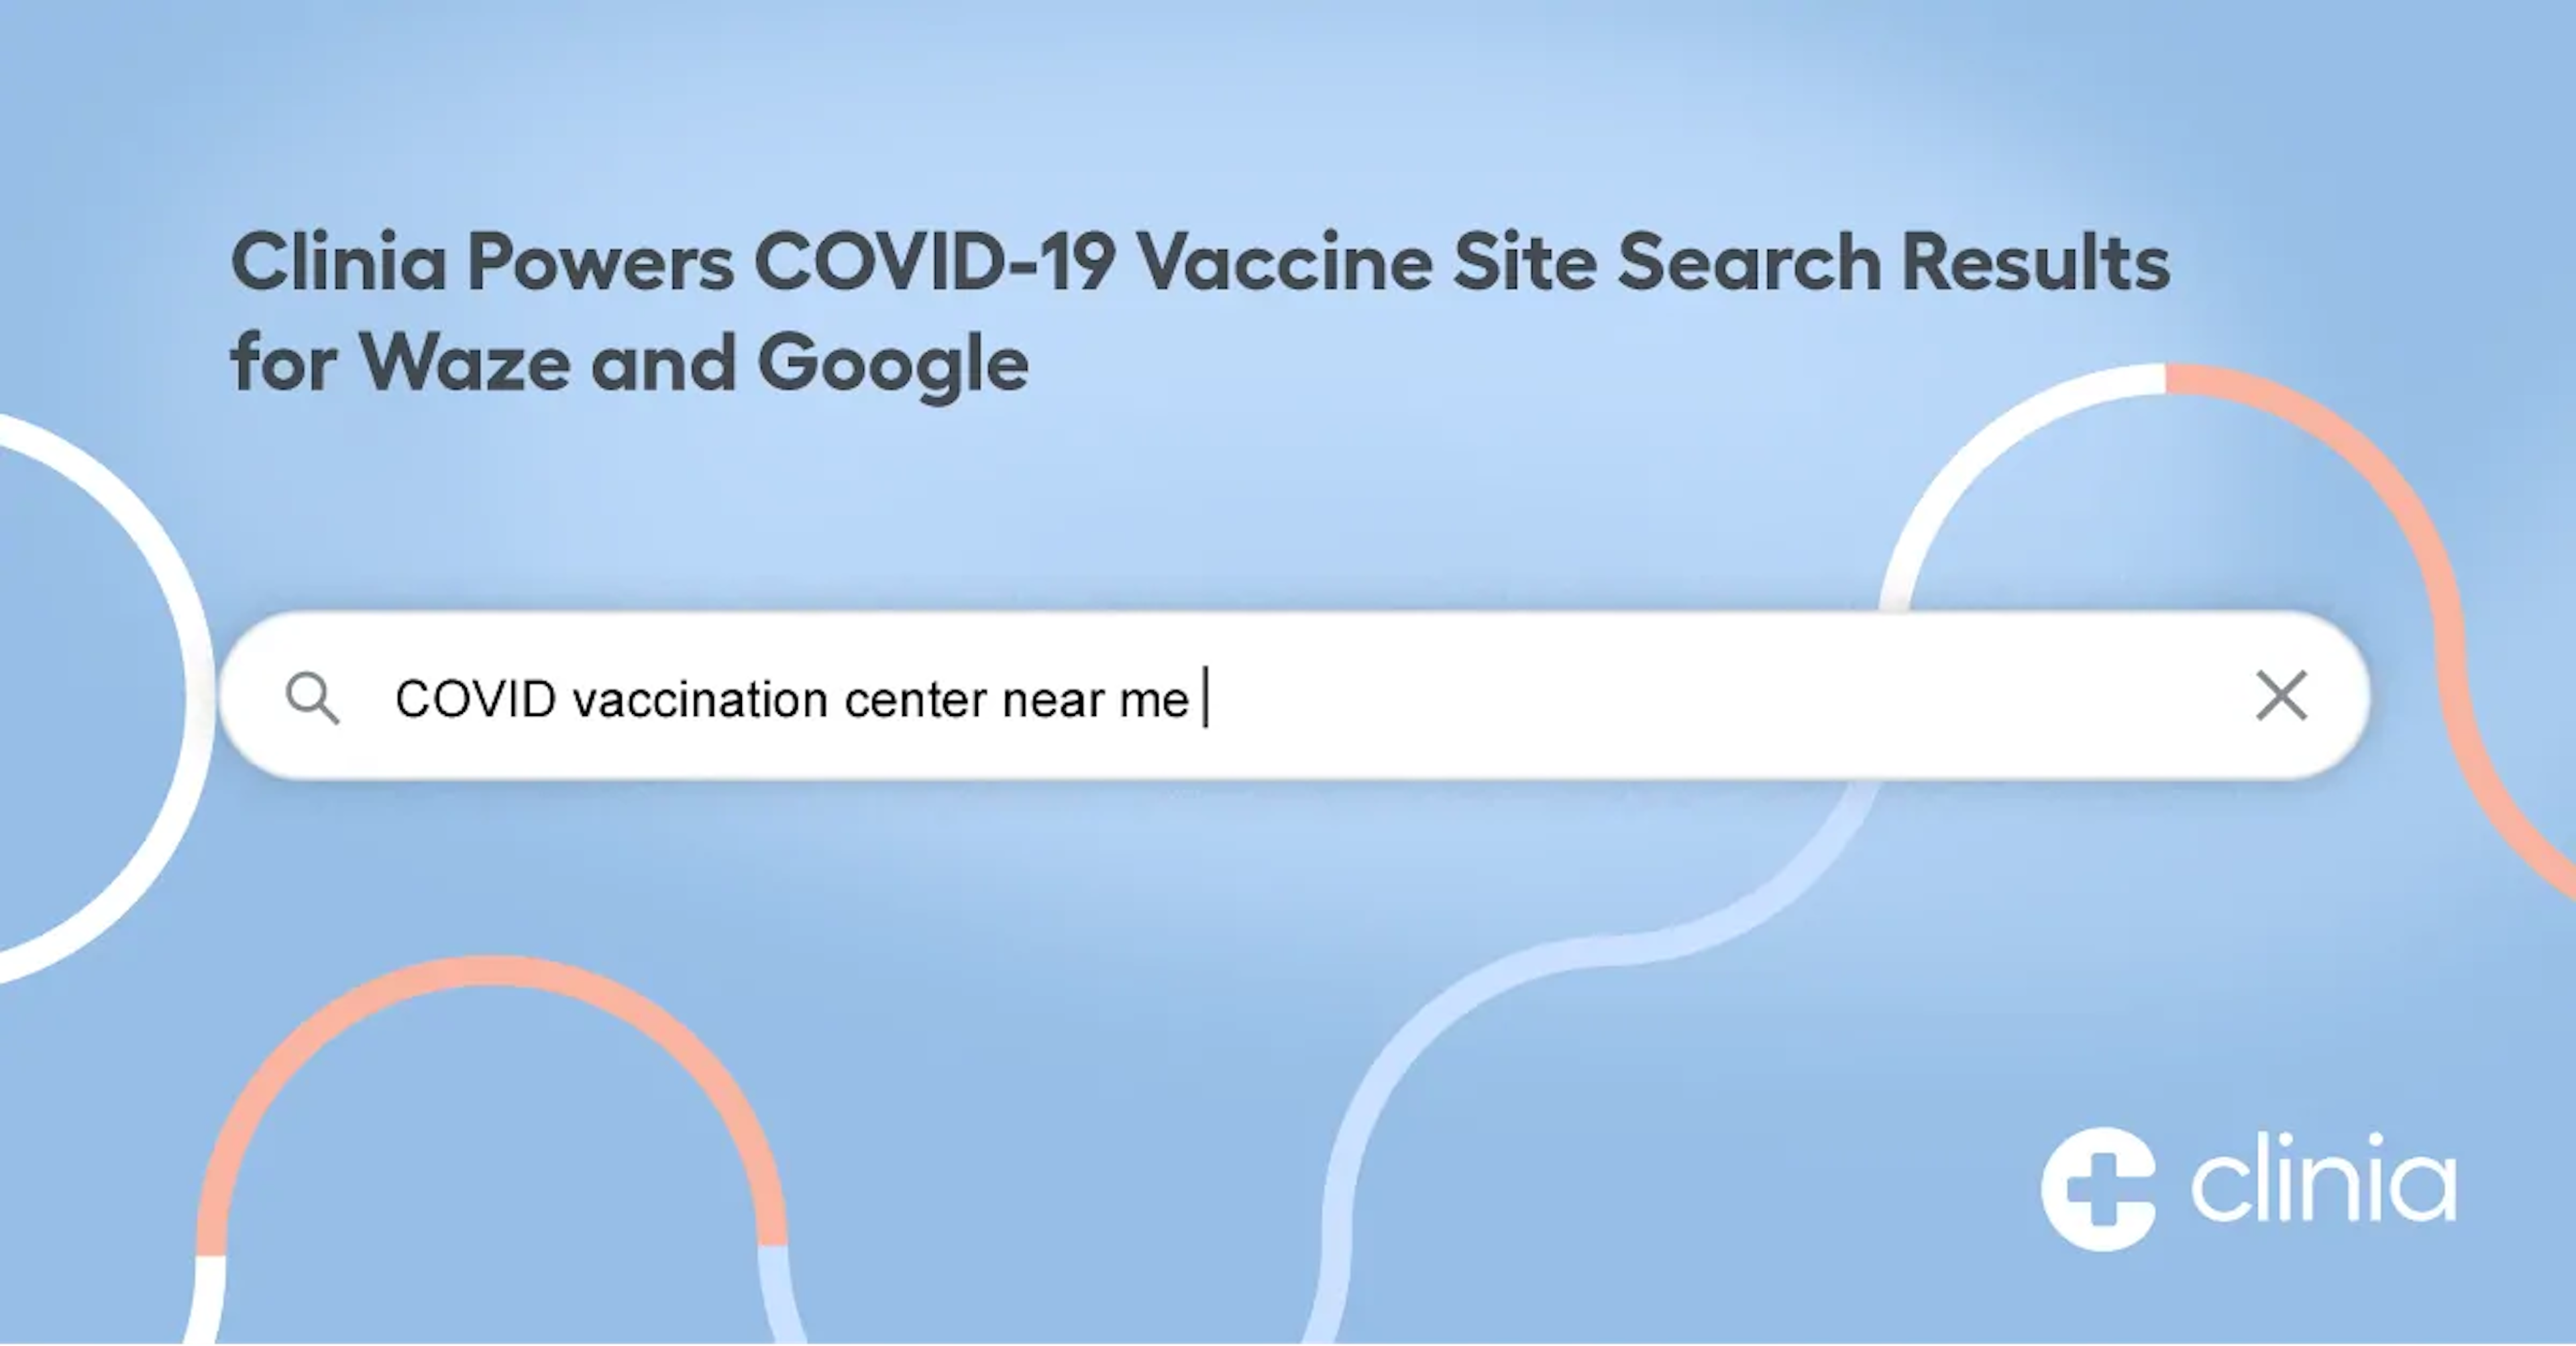 Clinia Powers COVID-19 Vaccine Site Search Results for Waze and Google